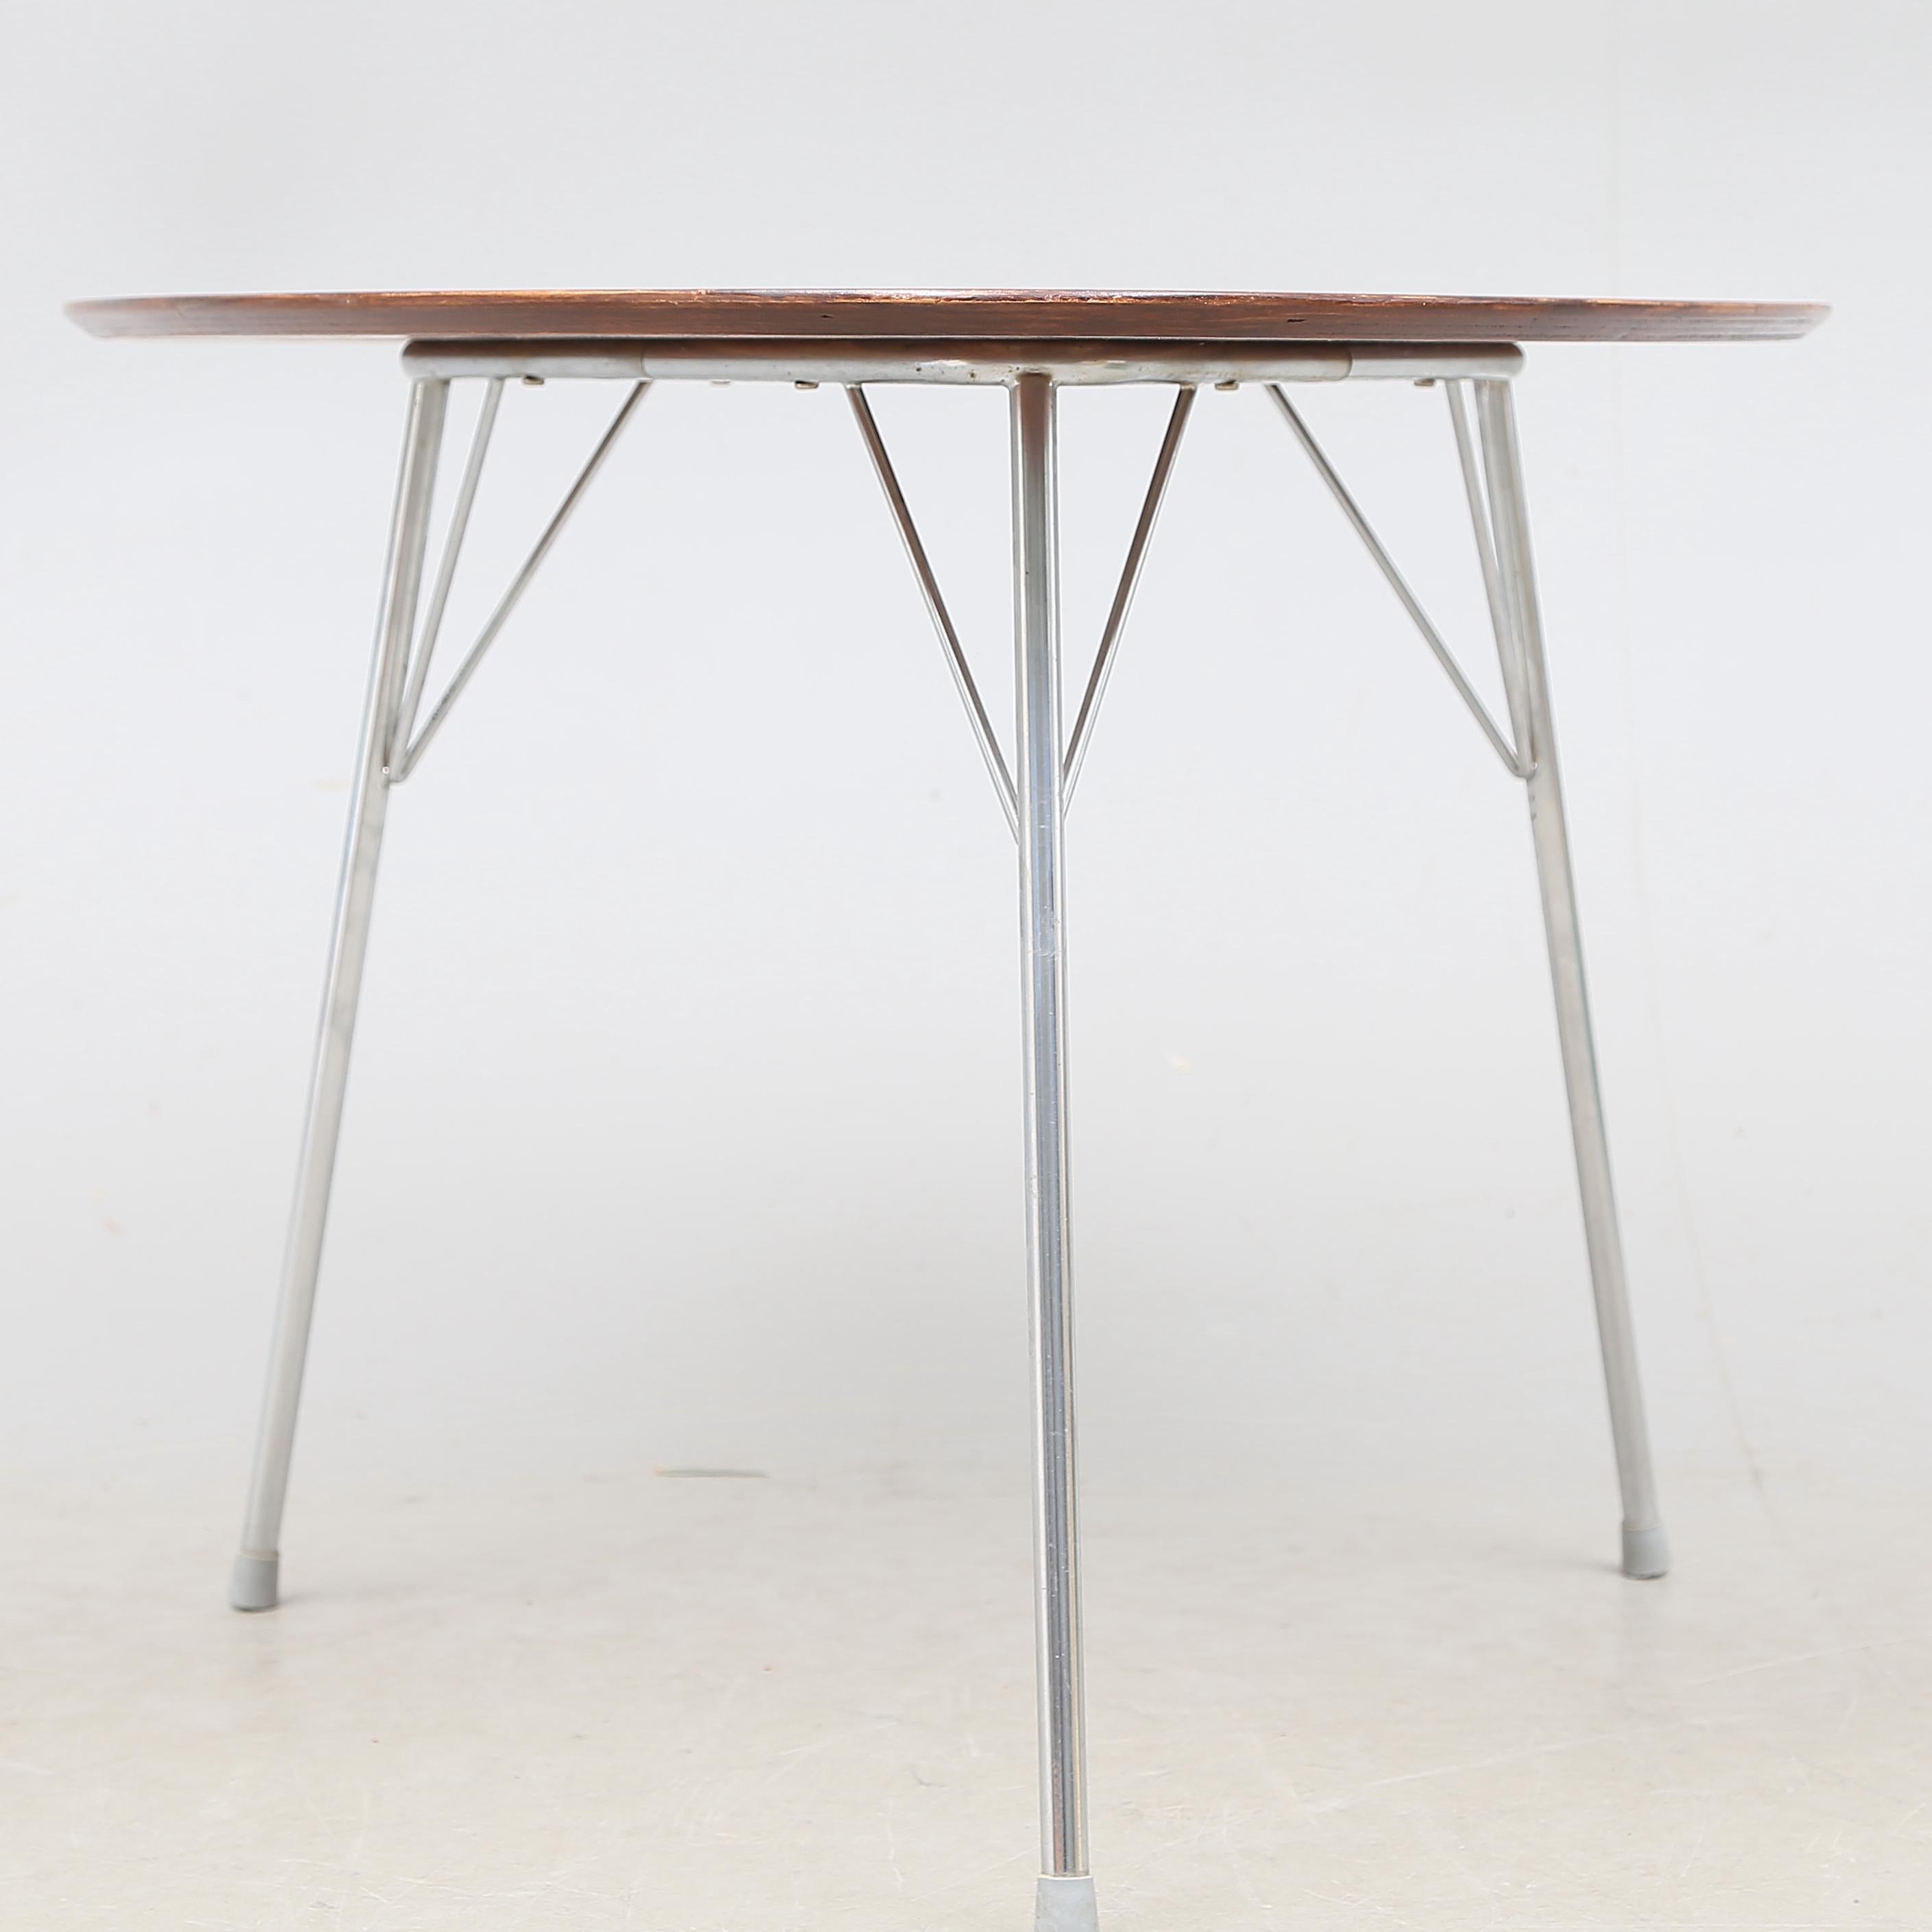 Arne Jacobsen Egg Table, model 3606, Side Table designed in 1952. This is a smaller version of the larger Egg Table designed by Arne Jacobsen to complement his 